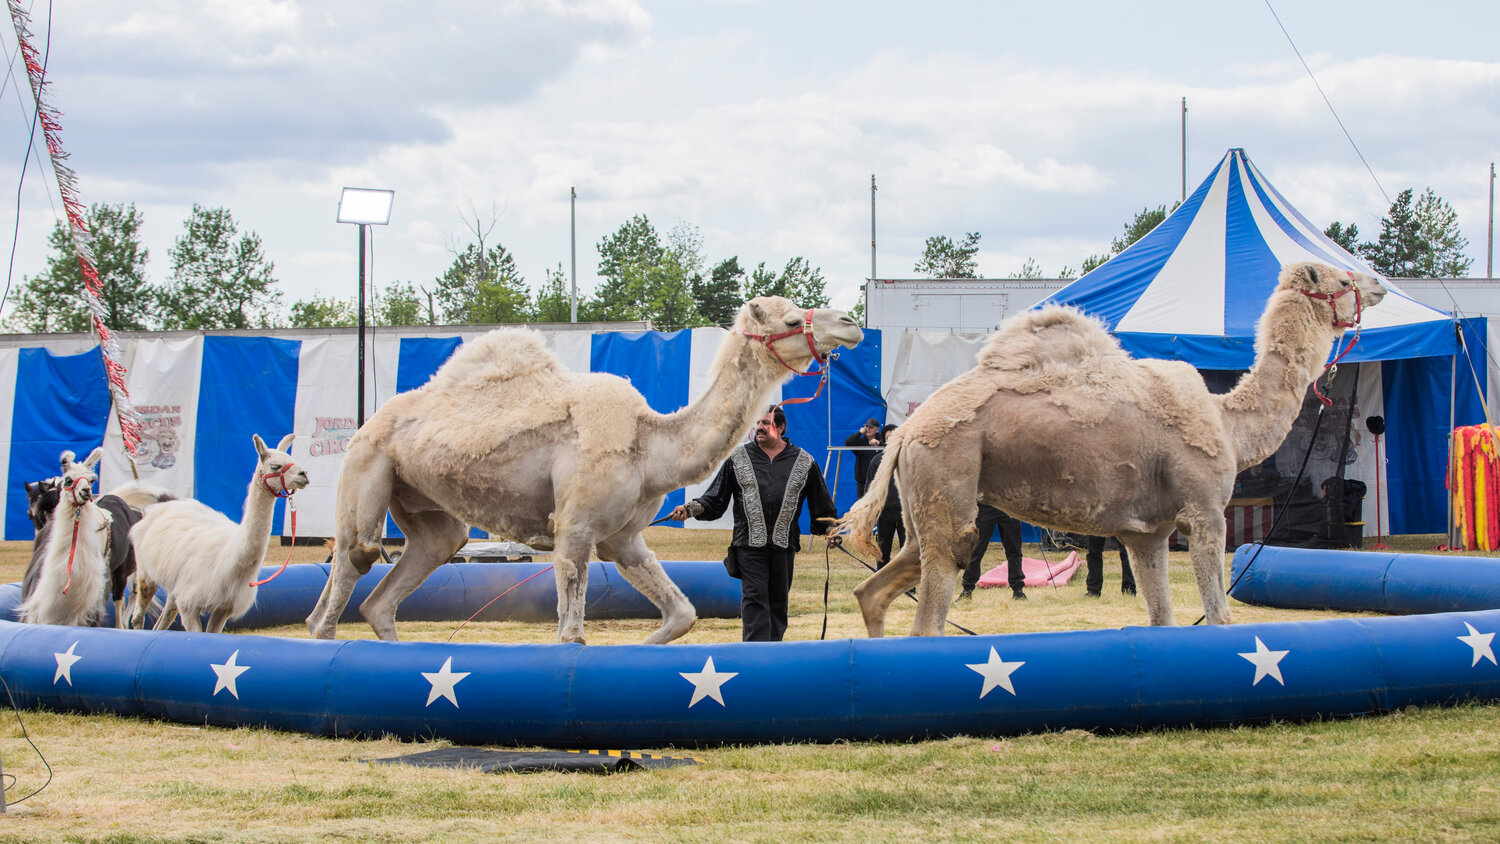 Camels, llamas and miniature horses circle a ring at the Southwest Washington Fairgrounds during the Jordan World Circus show on Wednesday, May 31.